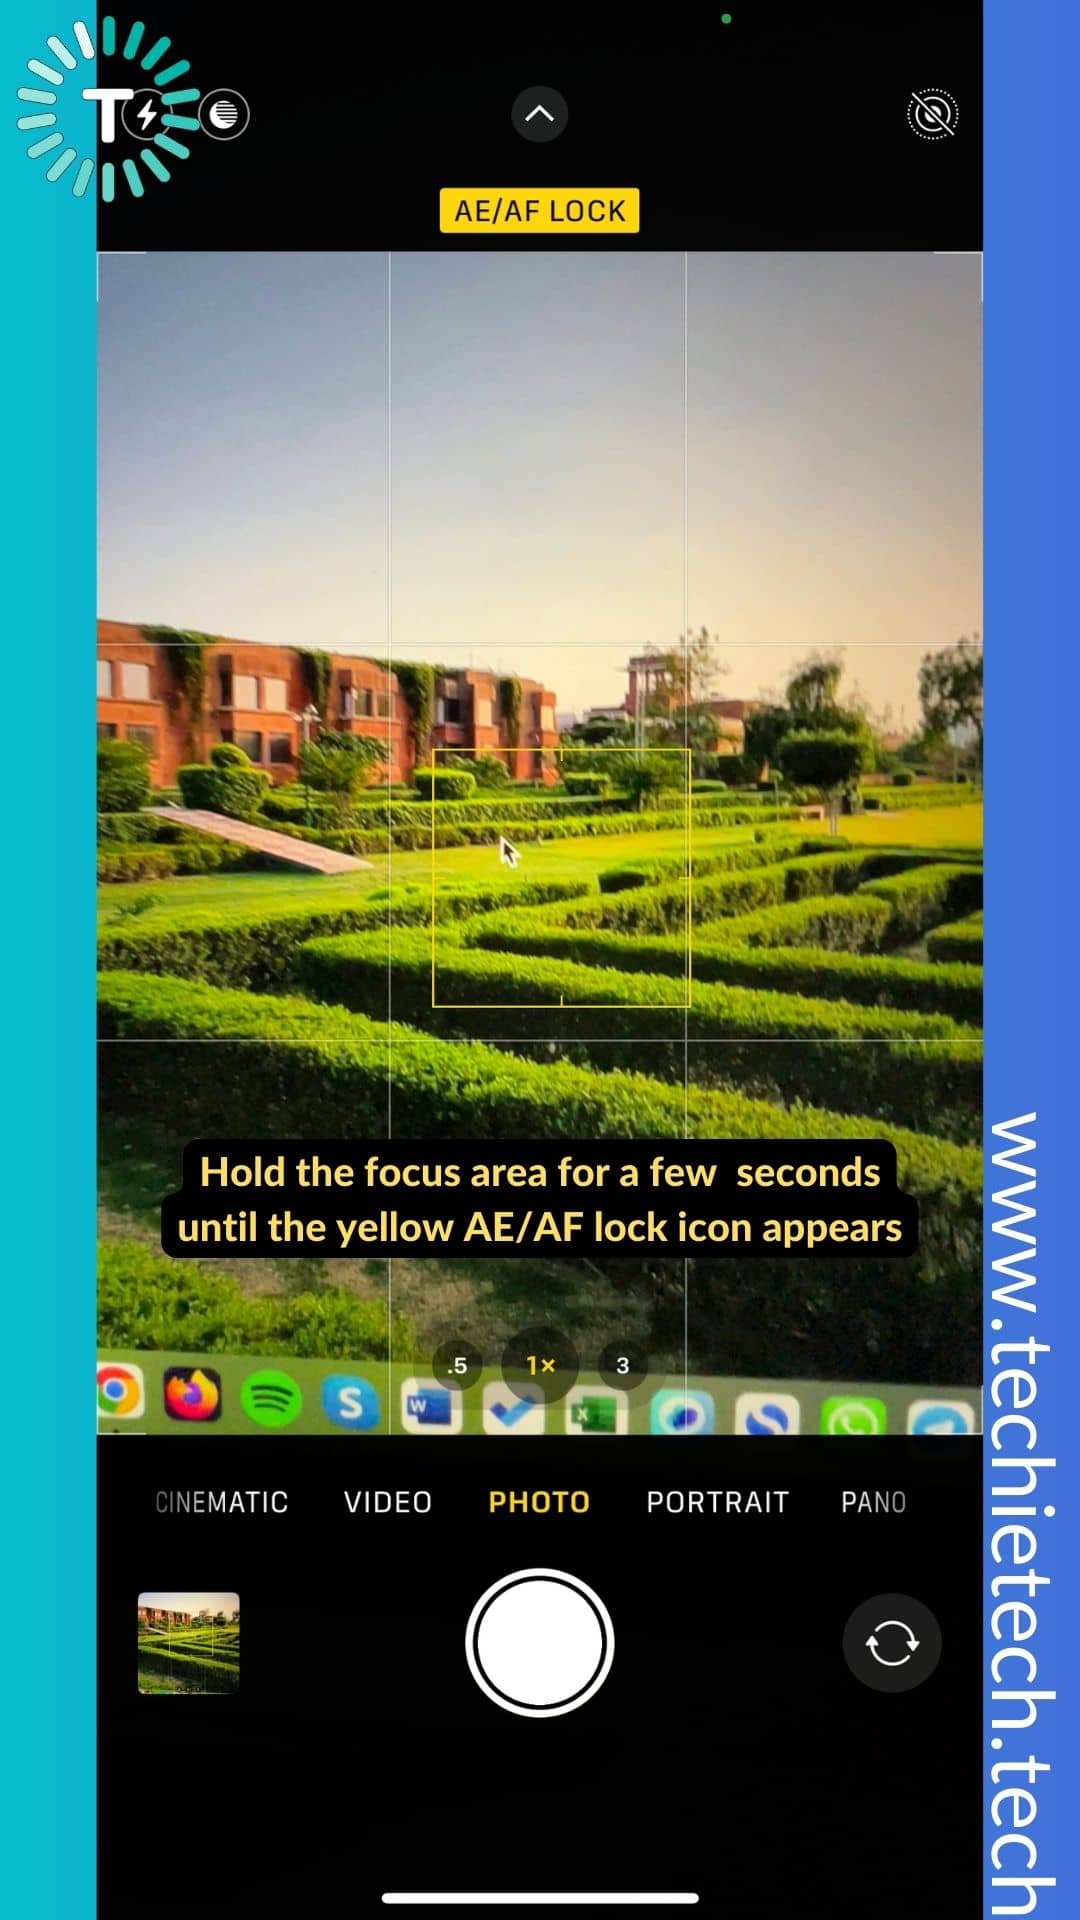 Hold the focus area for few seconds until you see AEAF lock icon